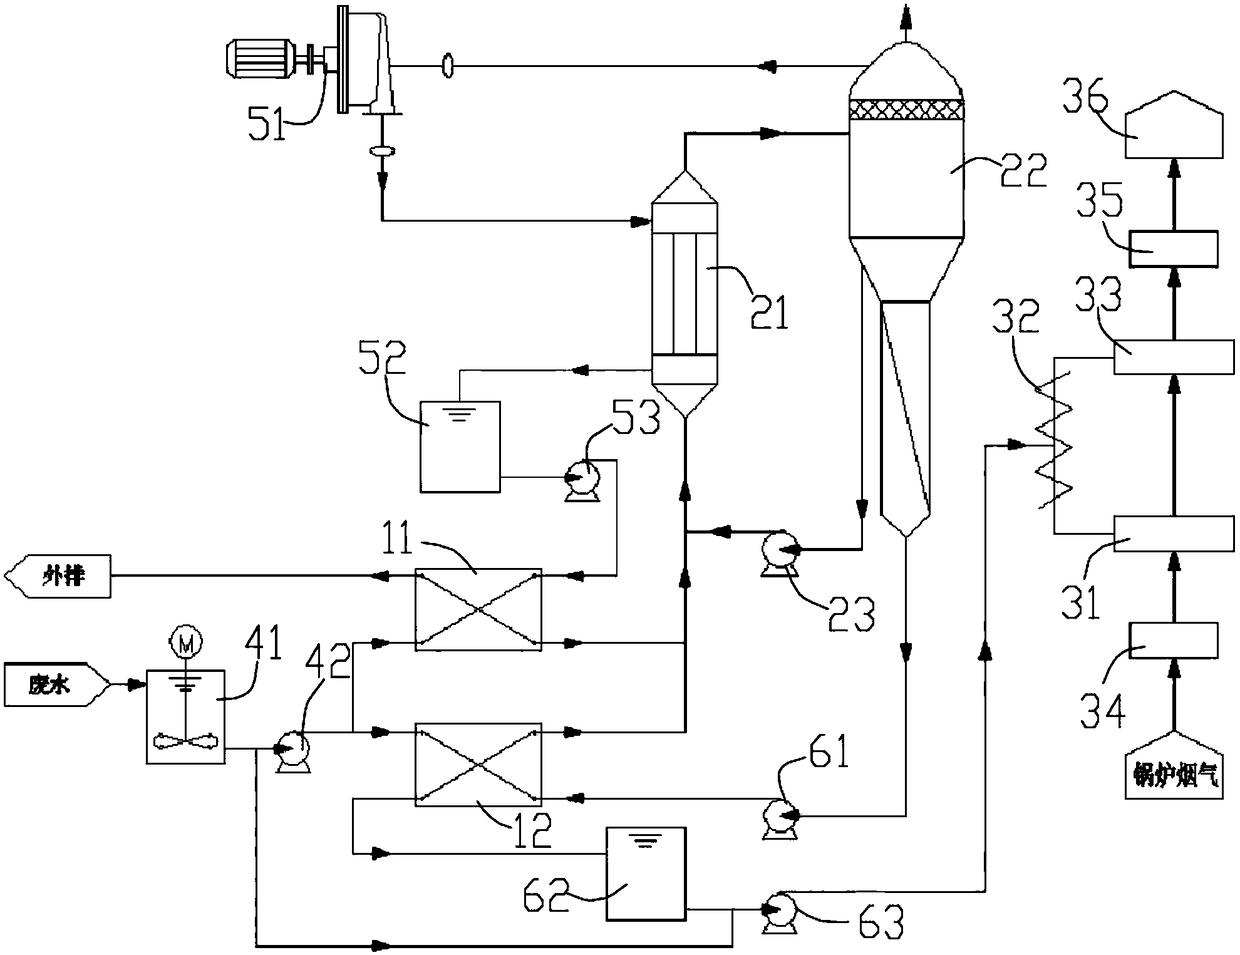 MVR concentration and swirling-flow atomization cooperated processing process and system